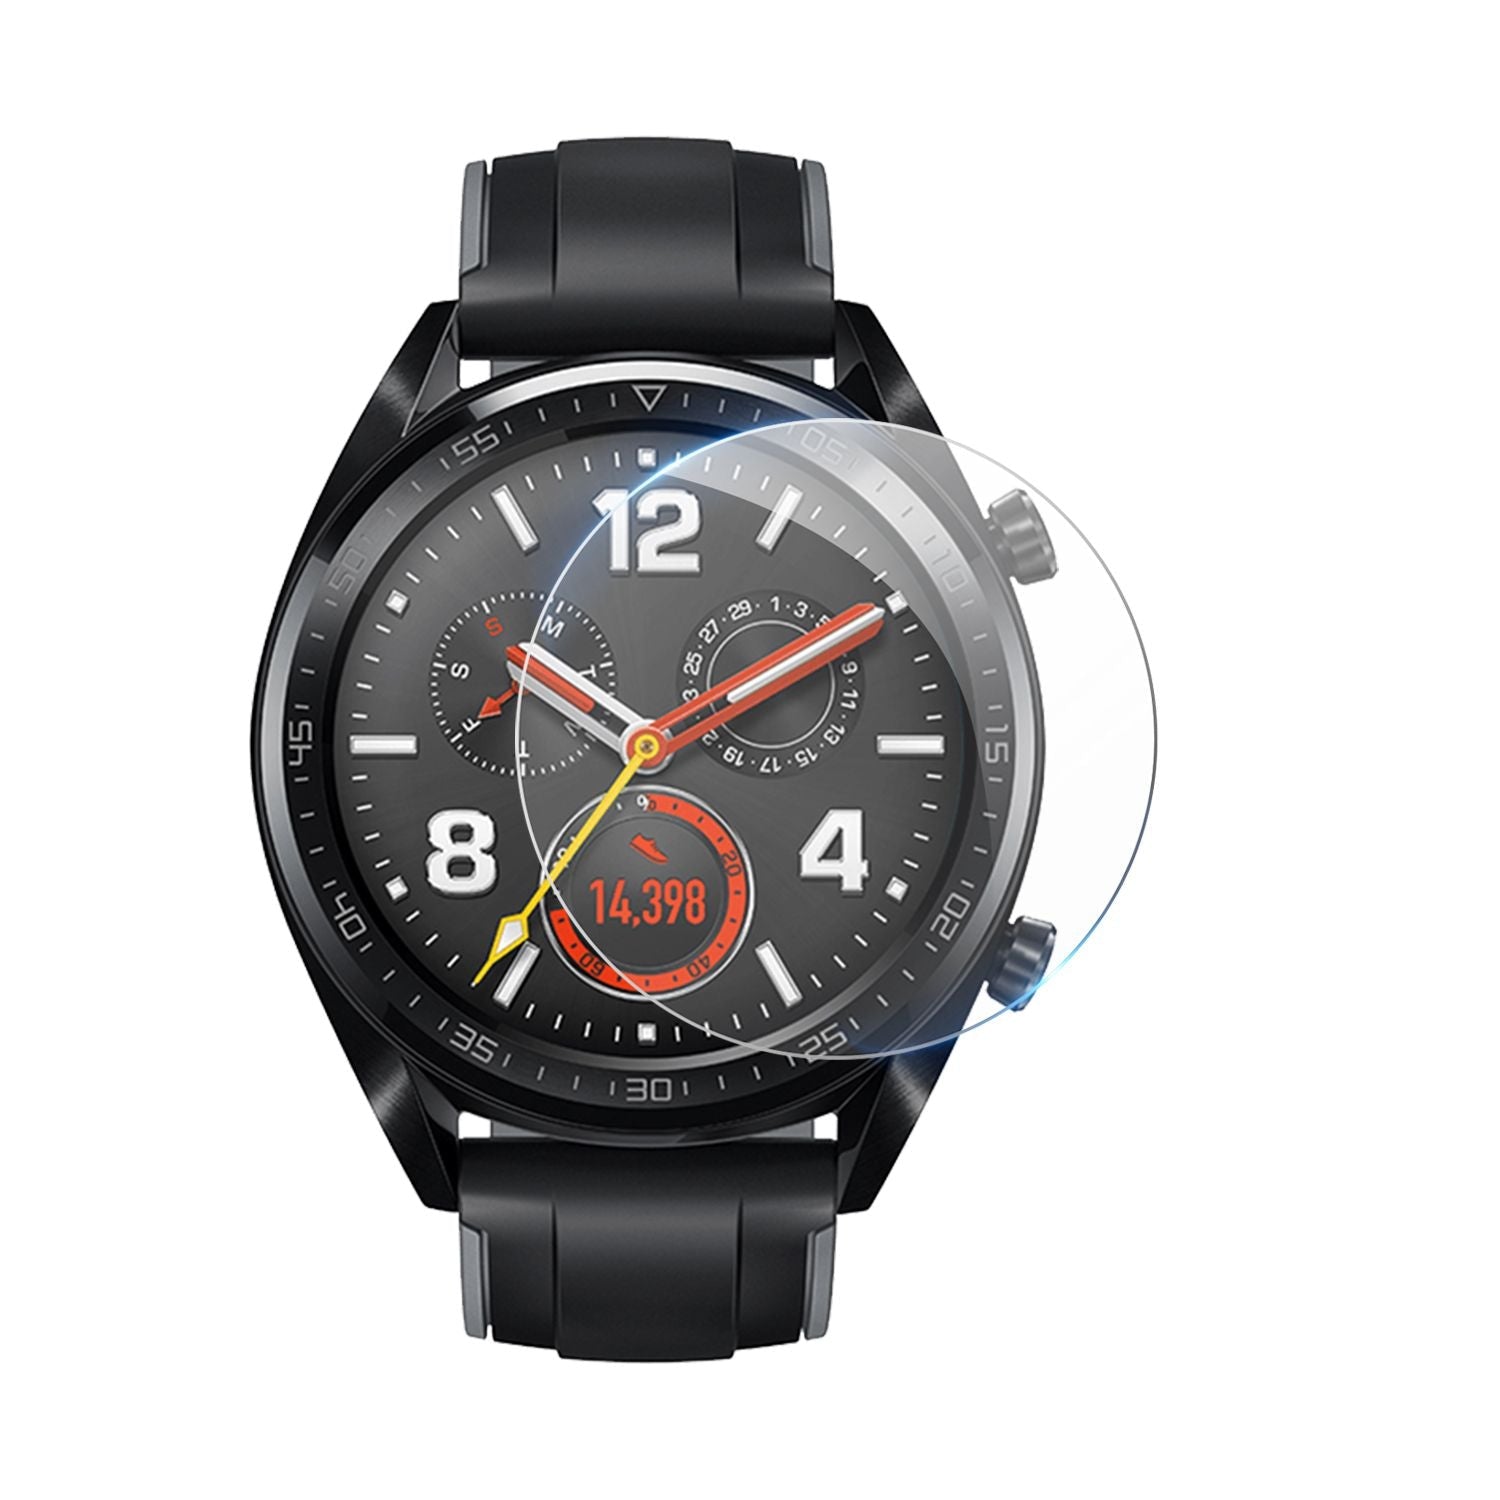 Protective Screen Film For Huawei GT Watch Screen Protector - 1PC